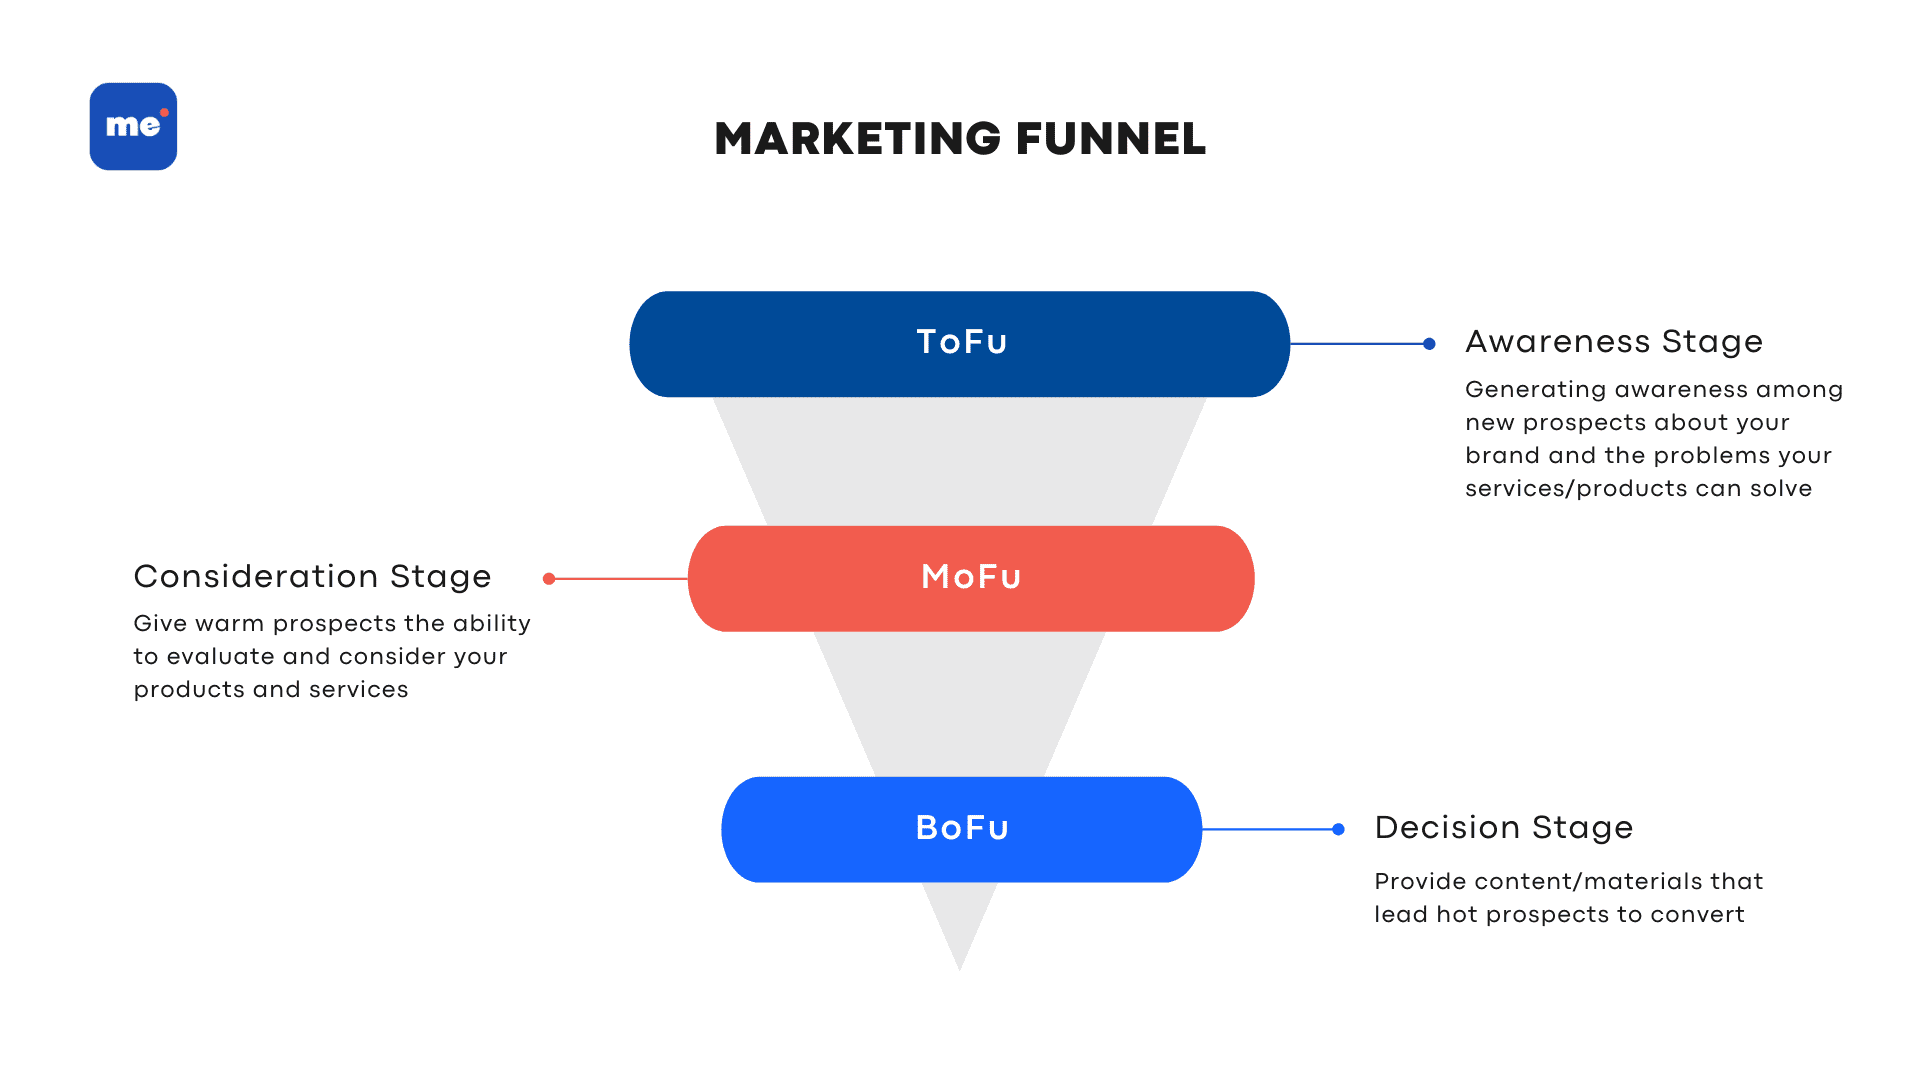 Marketing Funnel that includes Top of the Funnel